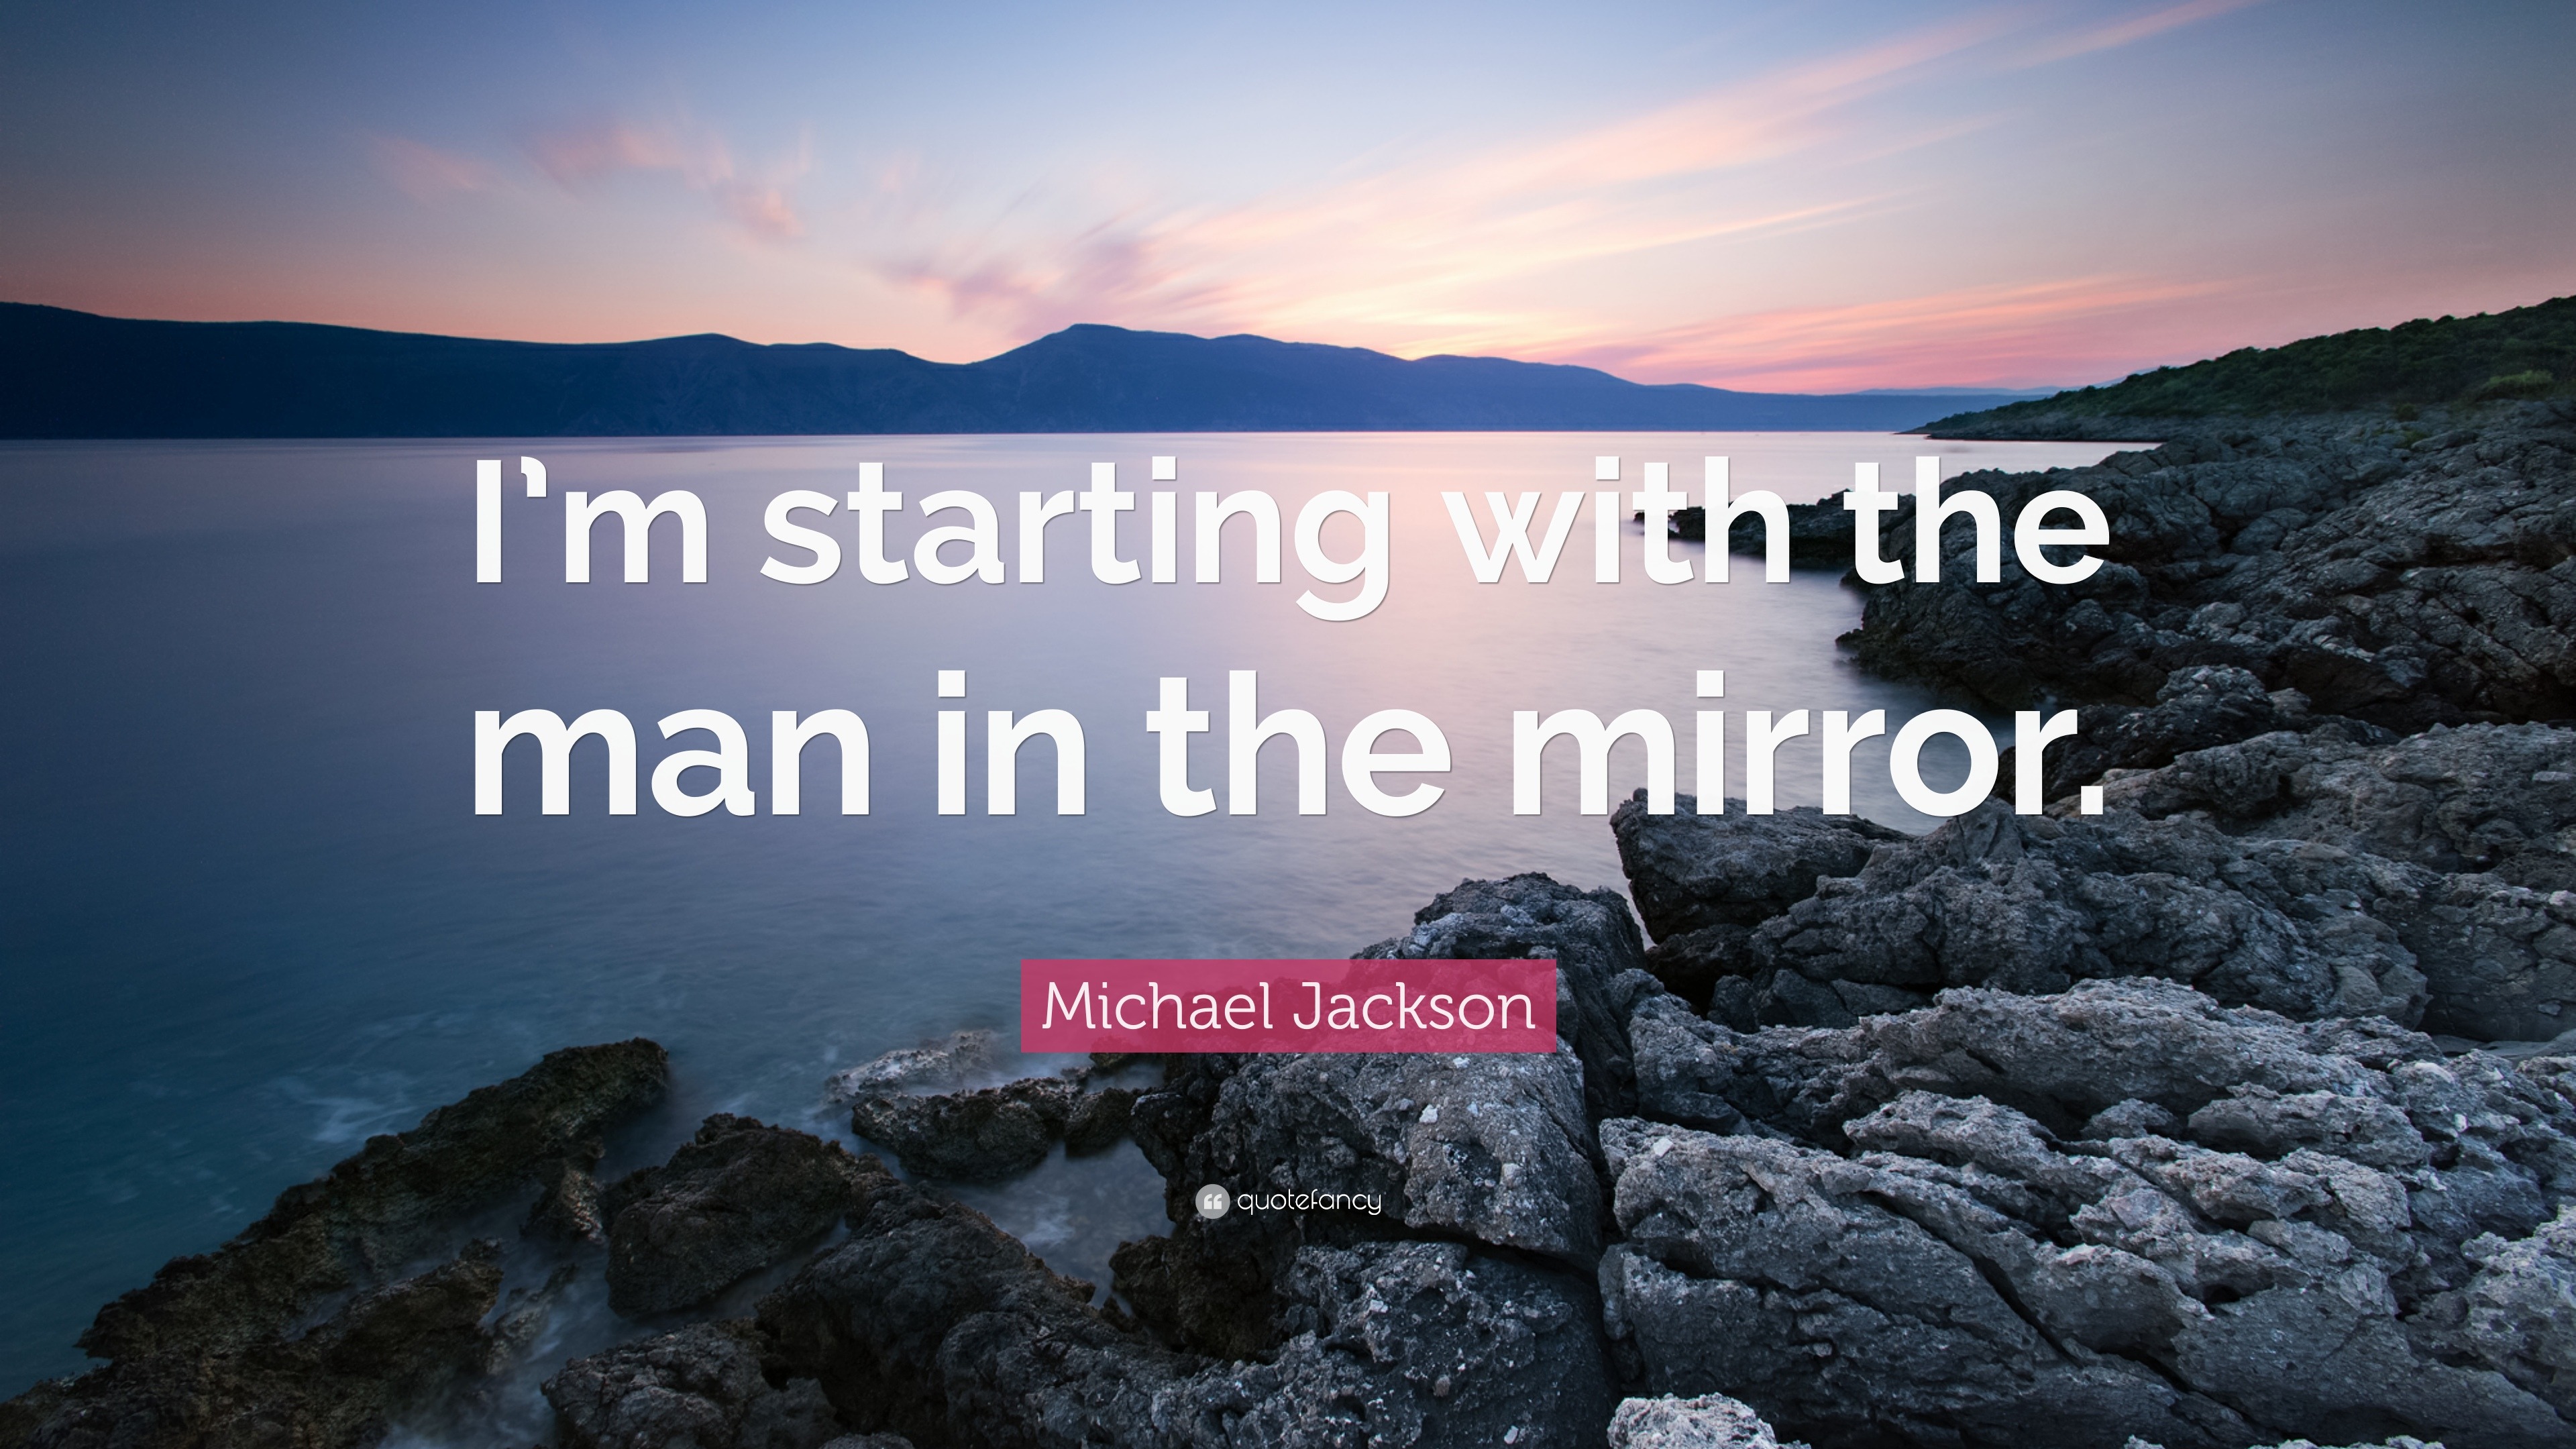 Michael Jackson Quote: "I'm starting with the man in the mirror." (12 wallpapers) - Quotefancy